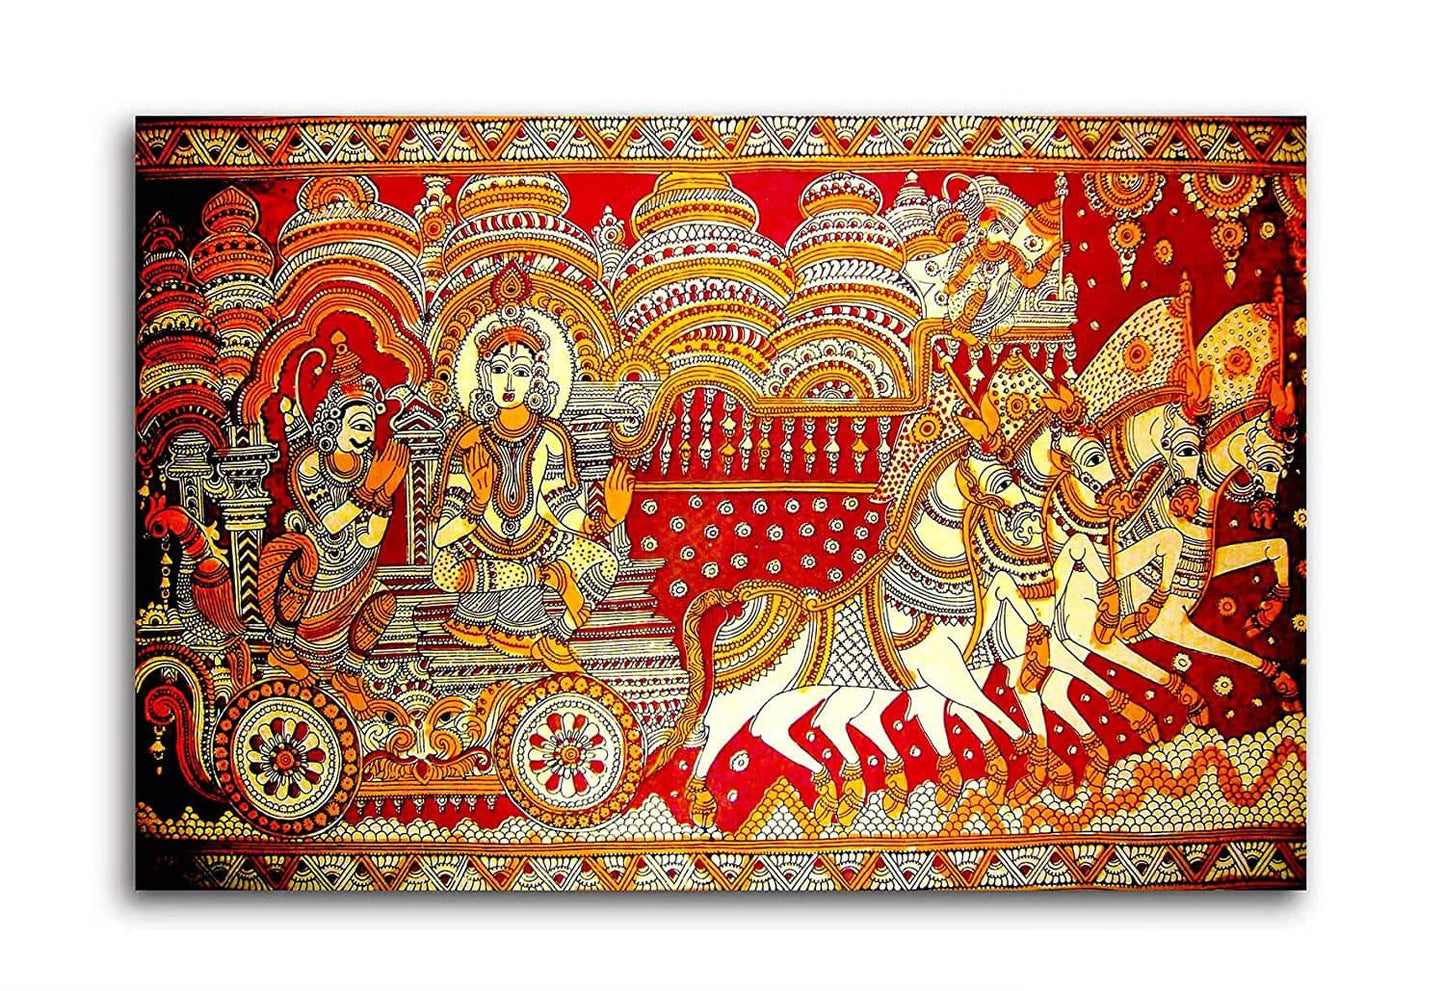 Madhubani Art Canvas Painting - Mahabharat Krishna with Arjun in Chariot (Size 36 X 24 Inches with Additional Border for Framing) Mangal Fashions | Indian Home Decor and Craft